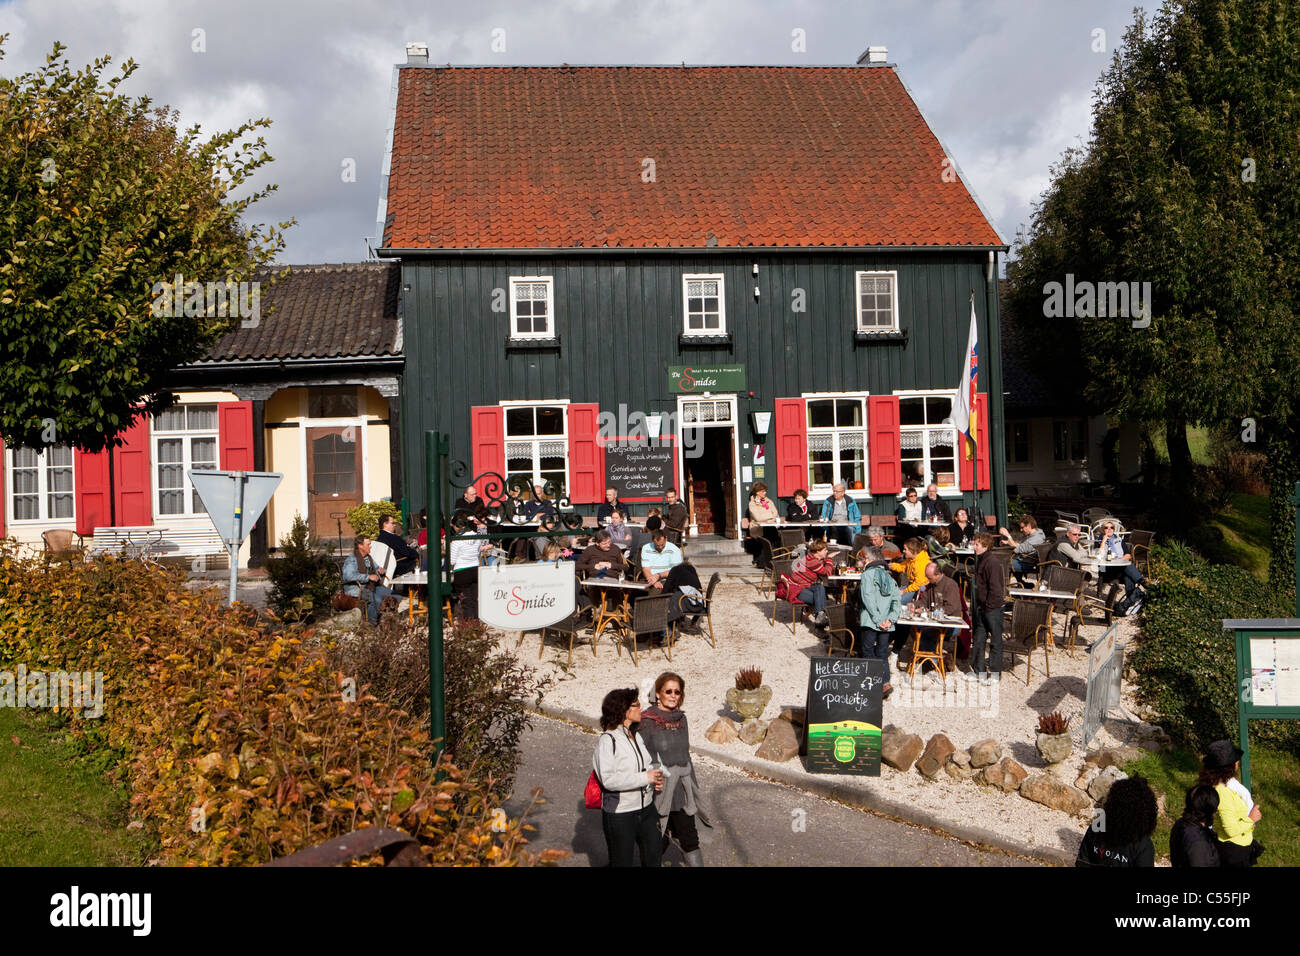 The Netherlands, Epen, Outdoor cafe and hotel called De Herberg. Stock Photo